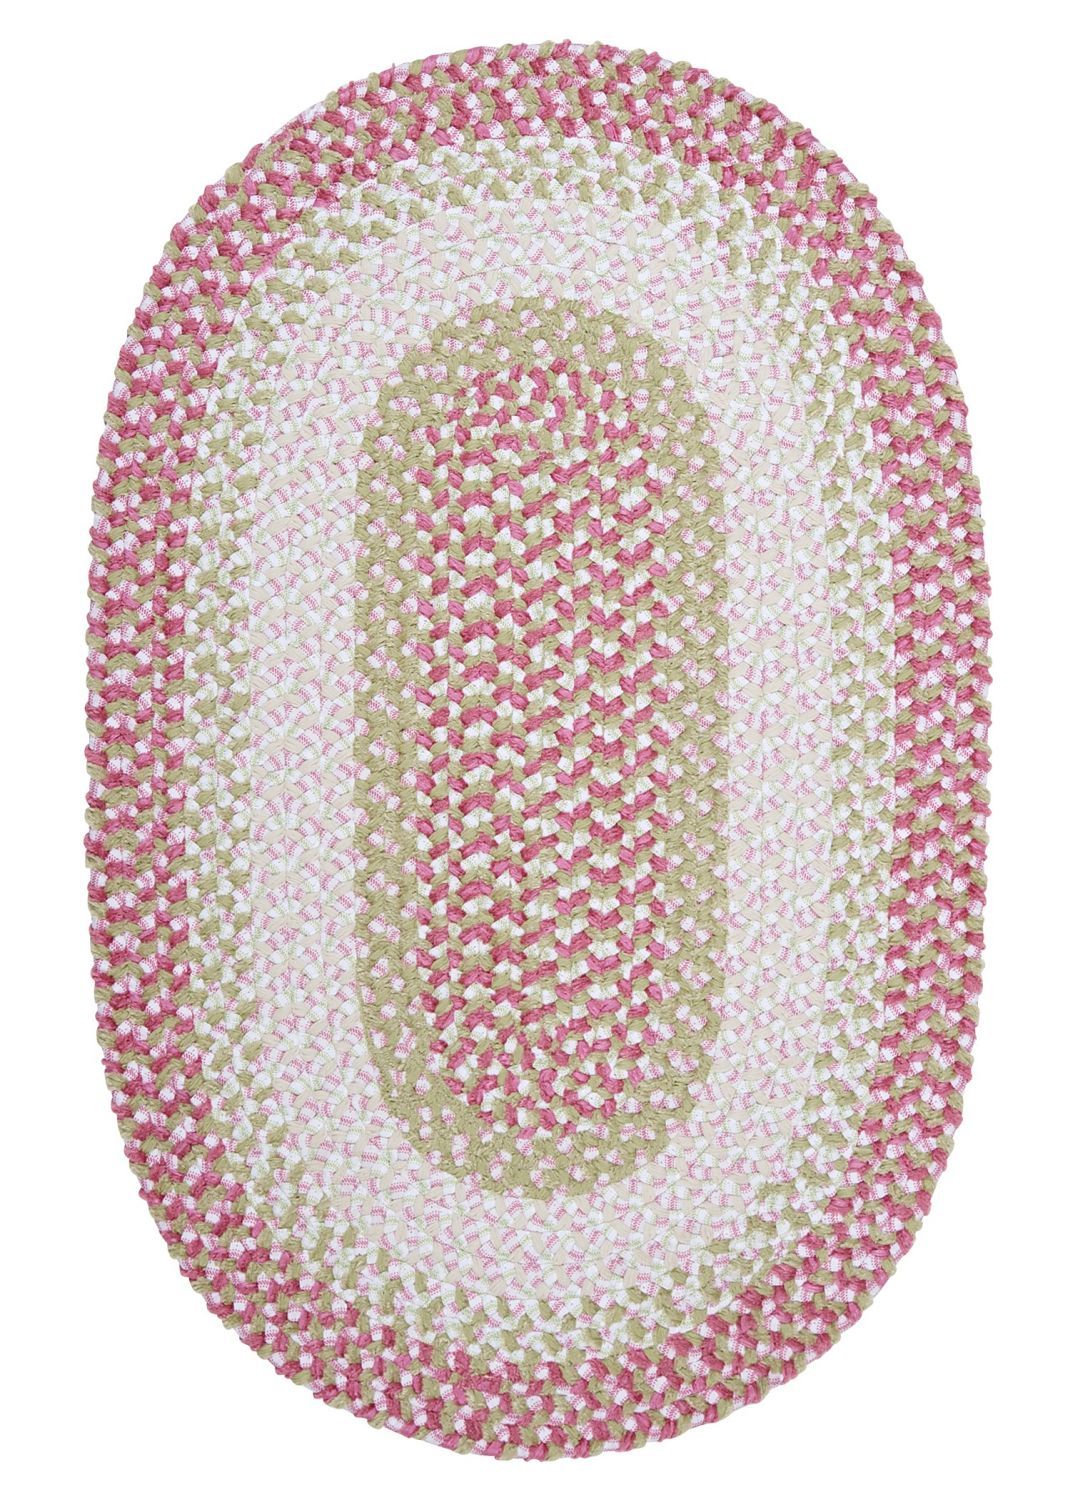 Area Rug for Girls Children Cute Playroom Nursery Carpet Soft Pink in 